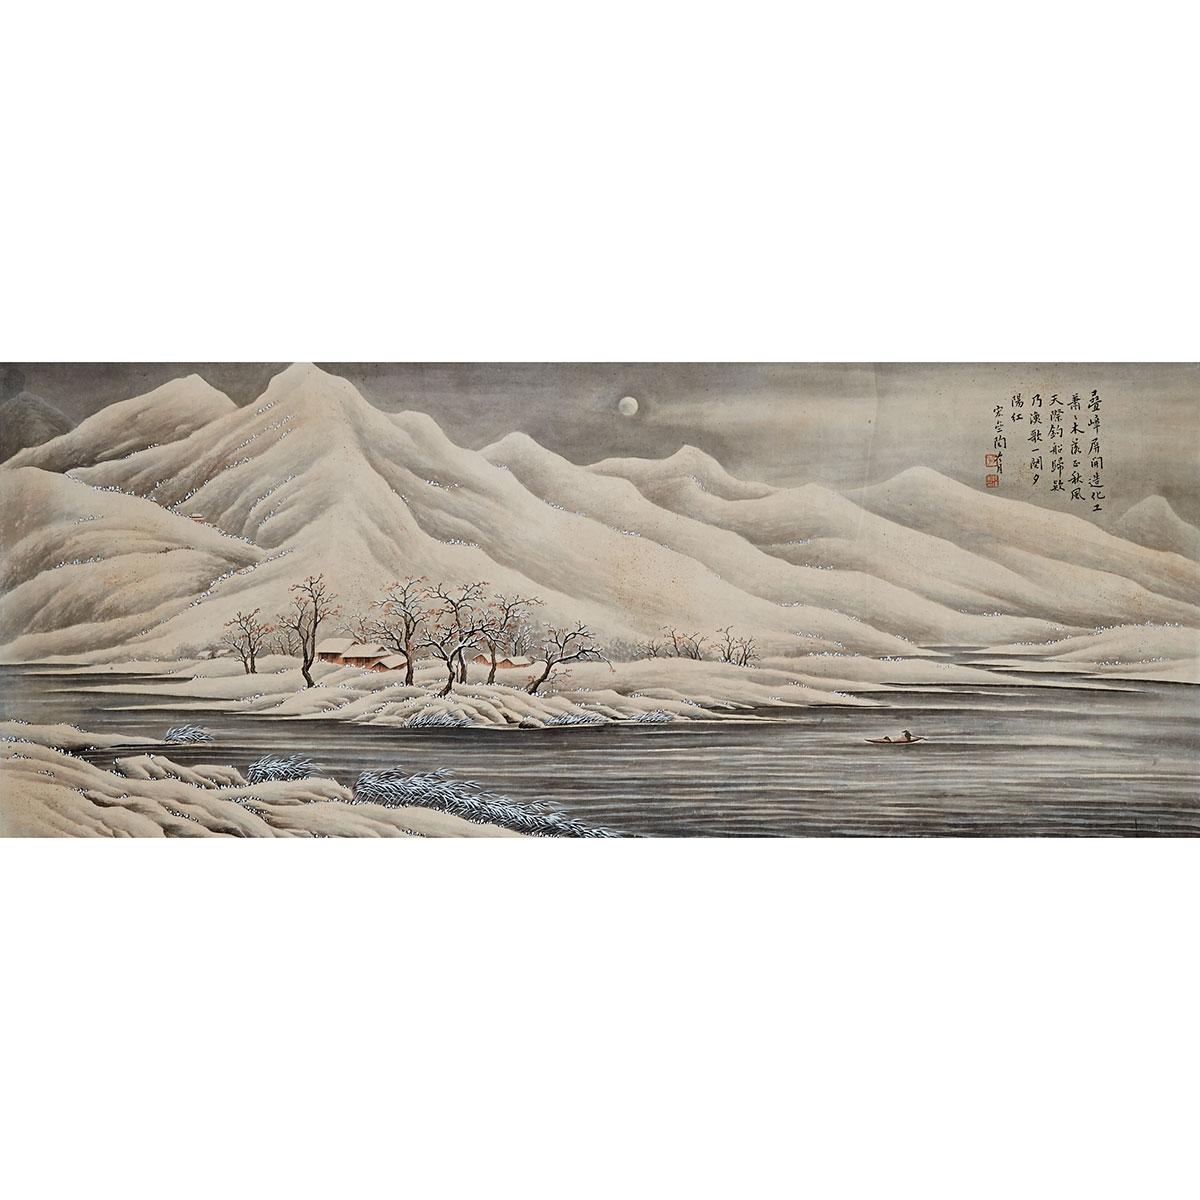 Attributed to Tao Lengyue (1895-1985)